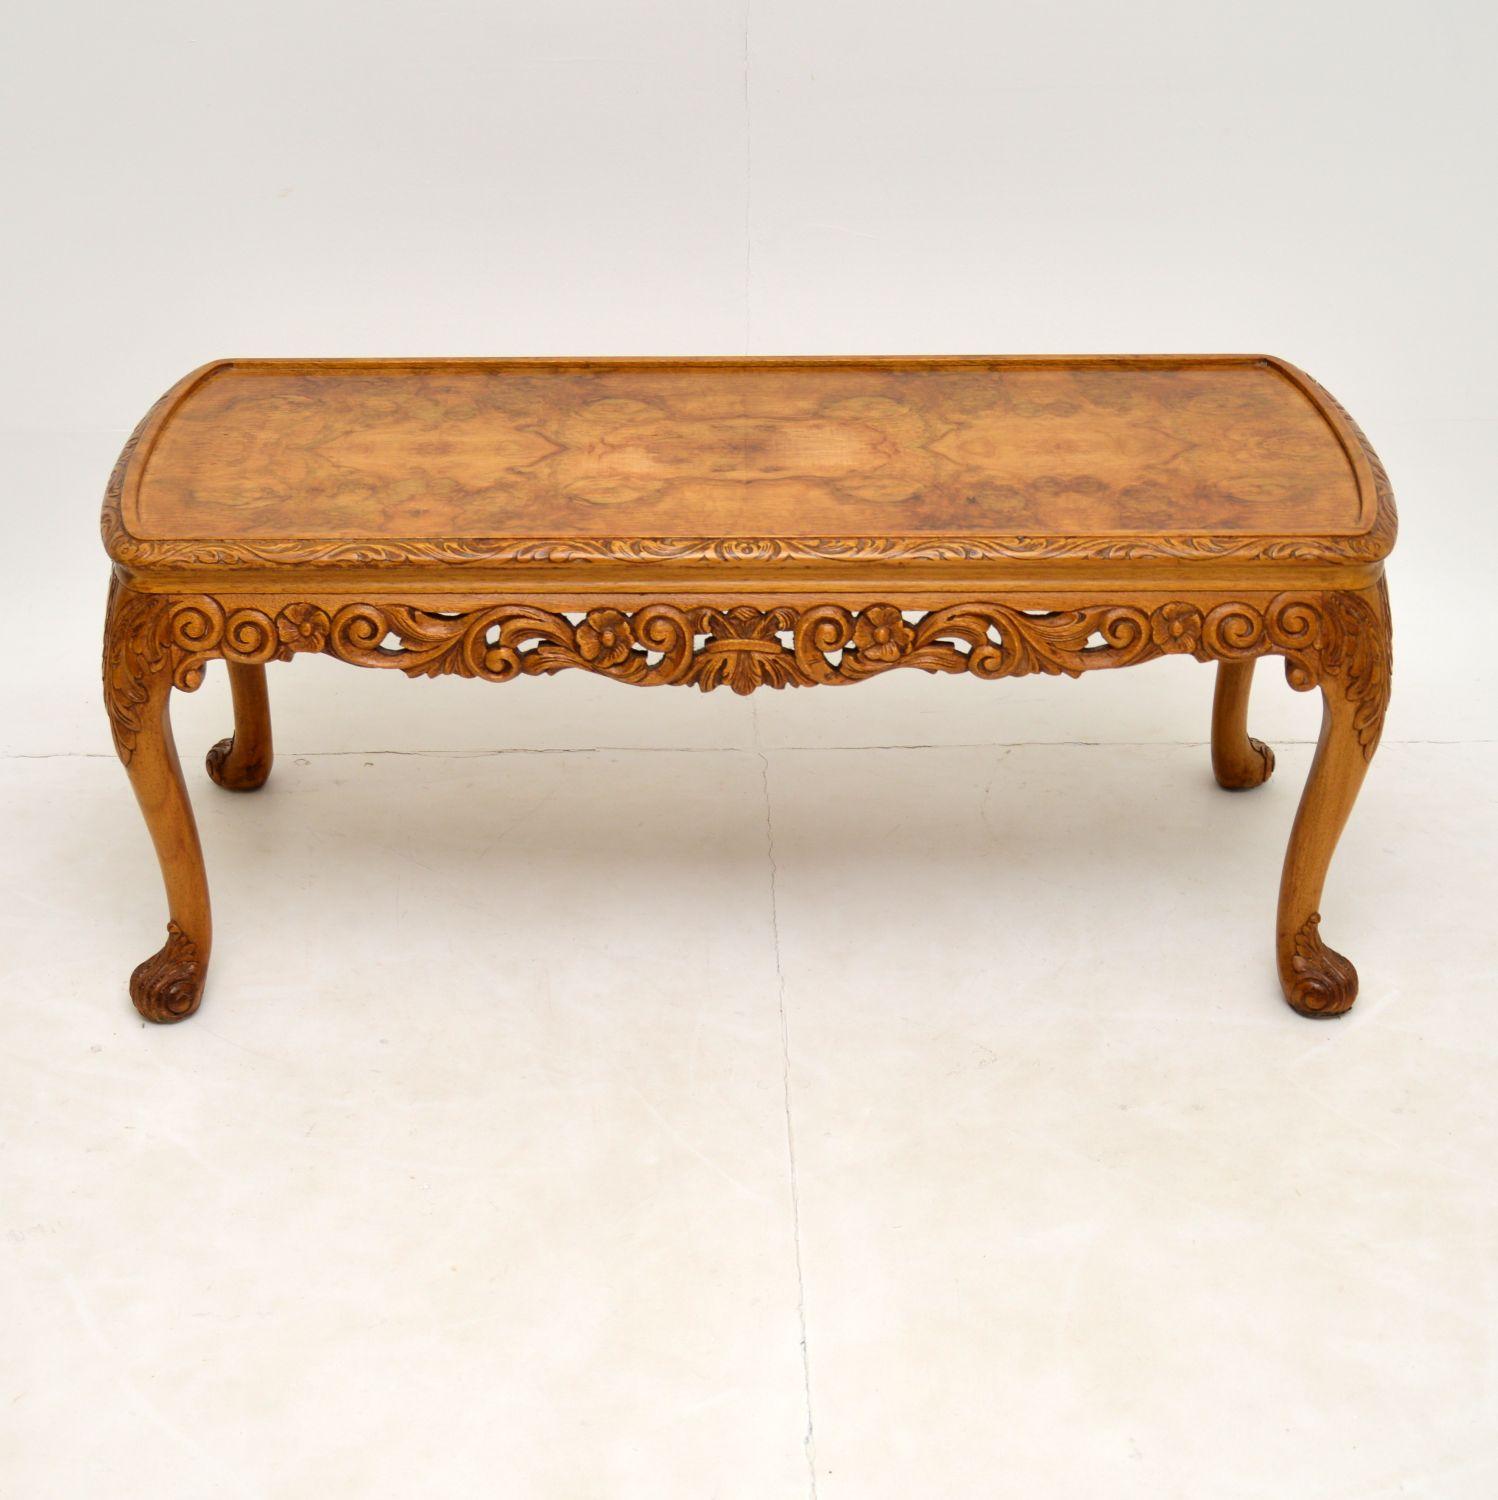 A beautiful antique Queen Anne style coffee table in walnut. This was made in England, it dates from the 1920-30’s.

The quality is amazing, it has a gorgeous carved solid walnut frame and amazing burr walnut veneers on the top. This is very